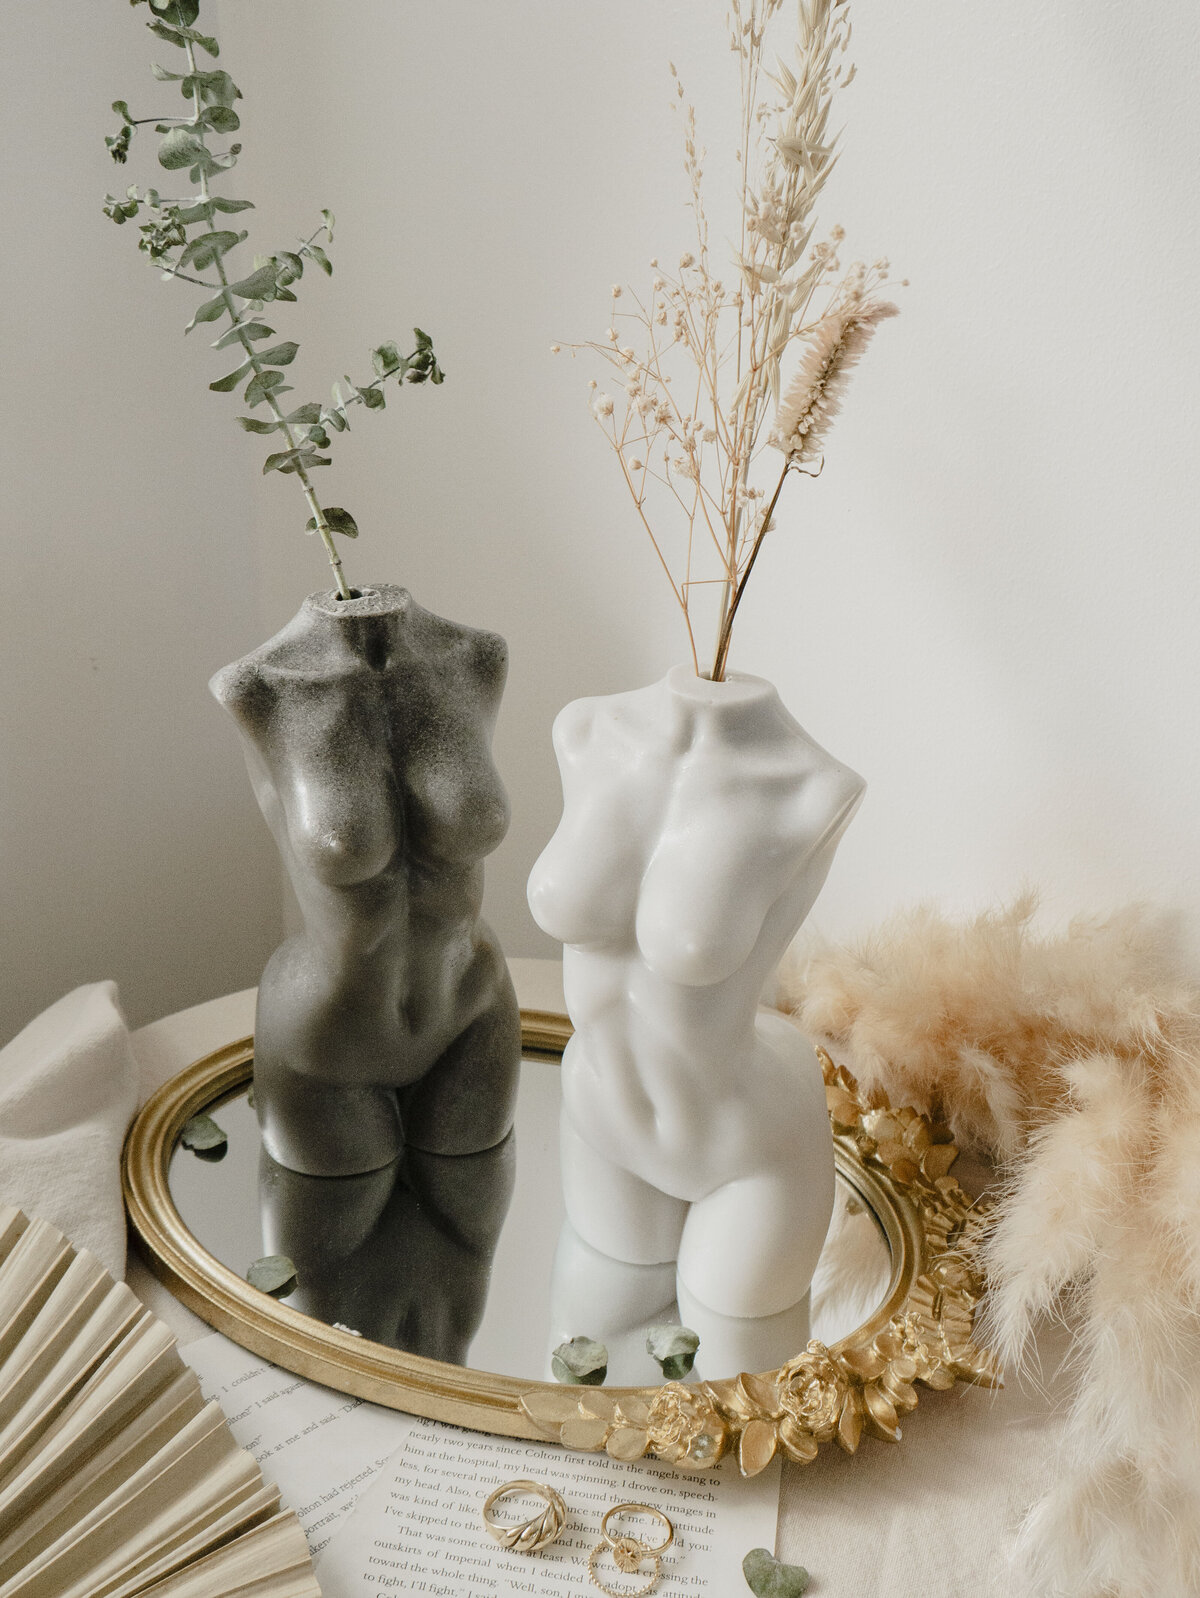 Boho photography for home decor and accessories by Hopeful Outsiders